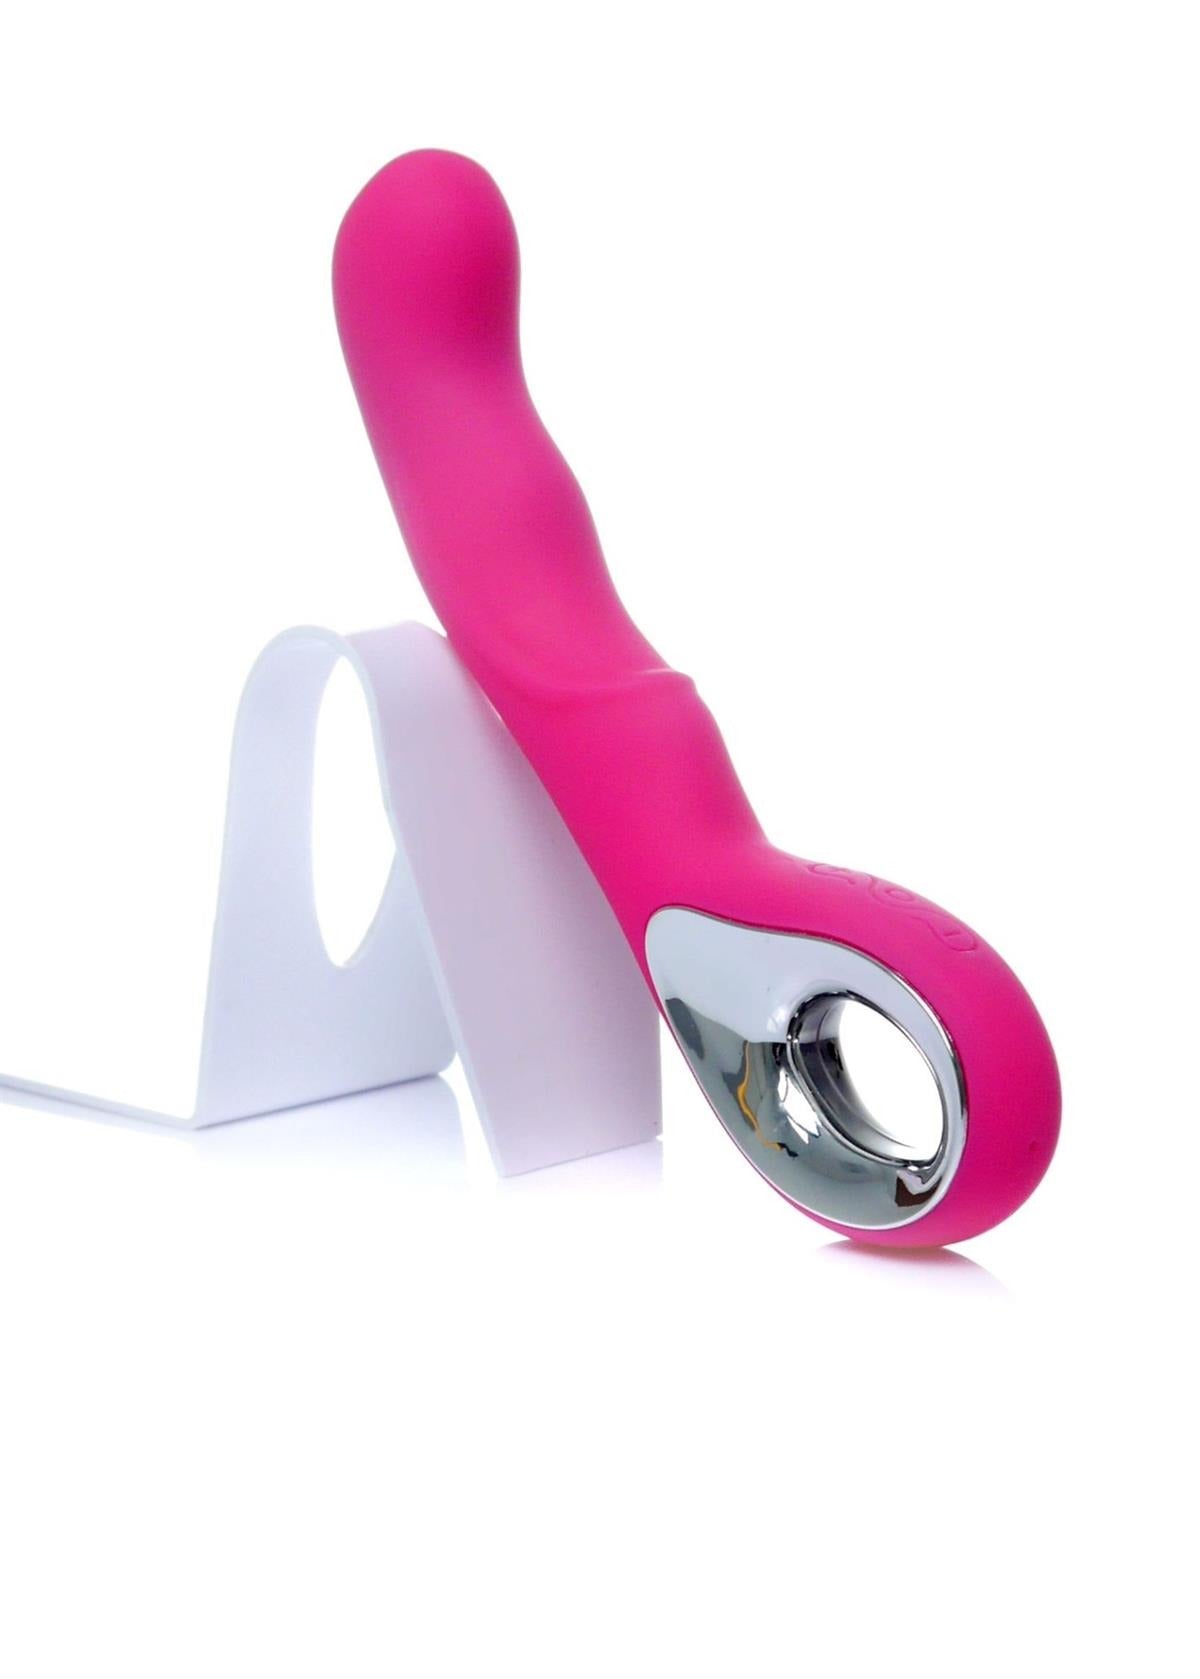 Bossoftoys - 26-00054  - Vibrator G-spot - 10 functions - USB - Pink -  100% waterproof - Rechargeable